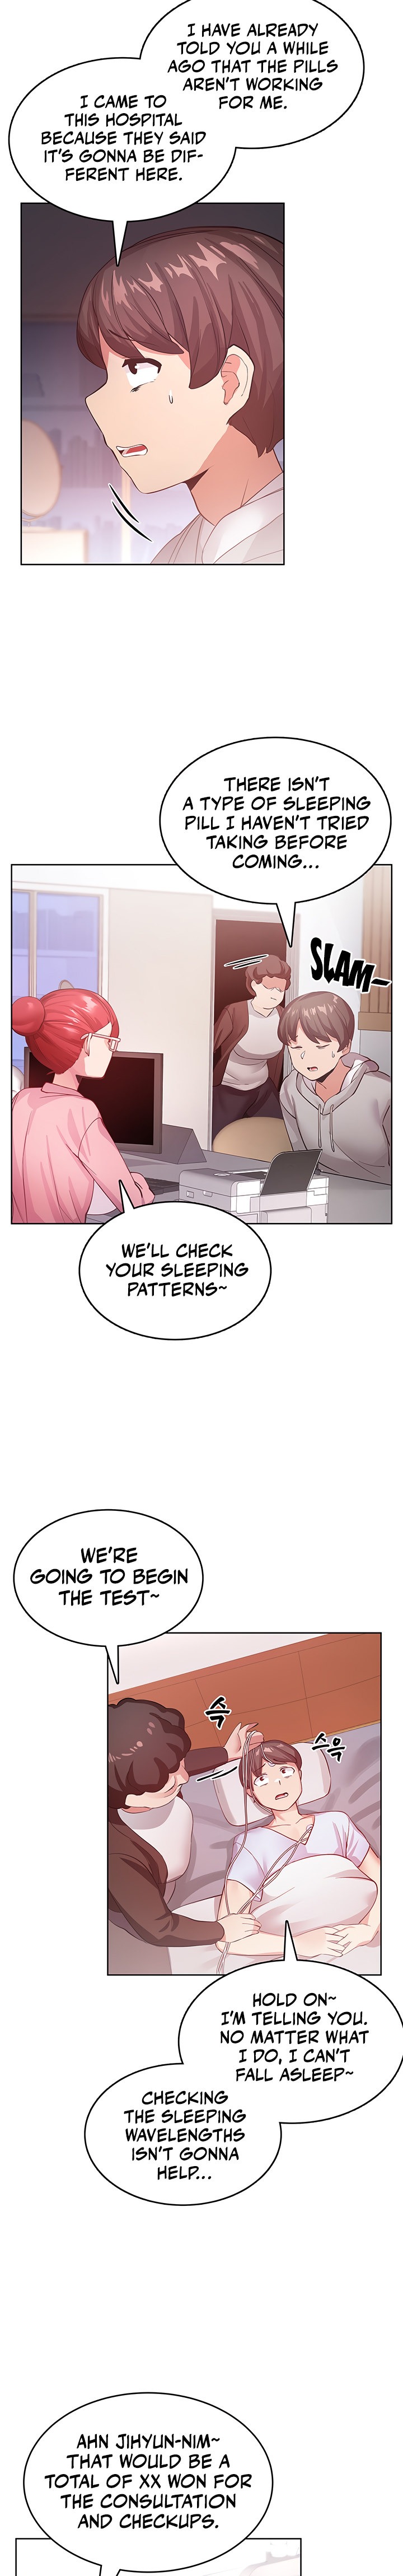 Relationship Reverse Button: Let’s Cure That Arrogant Girl - Chapter 1 Page 2